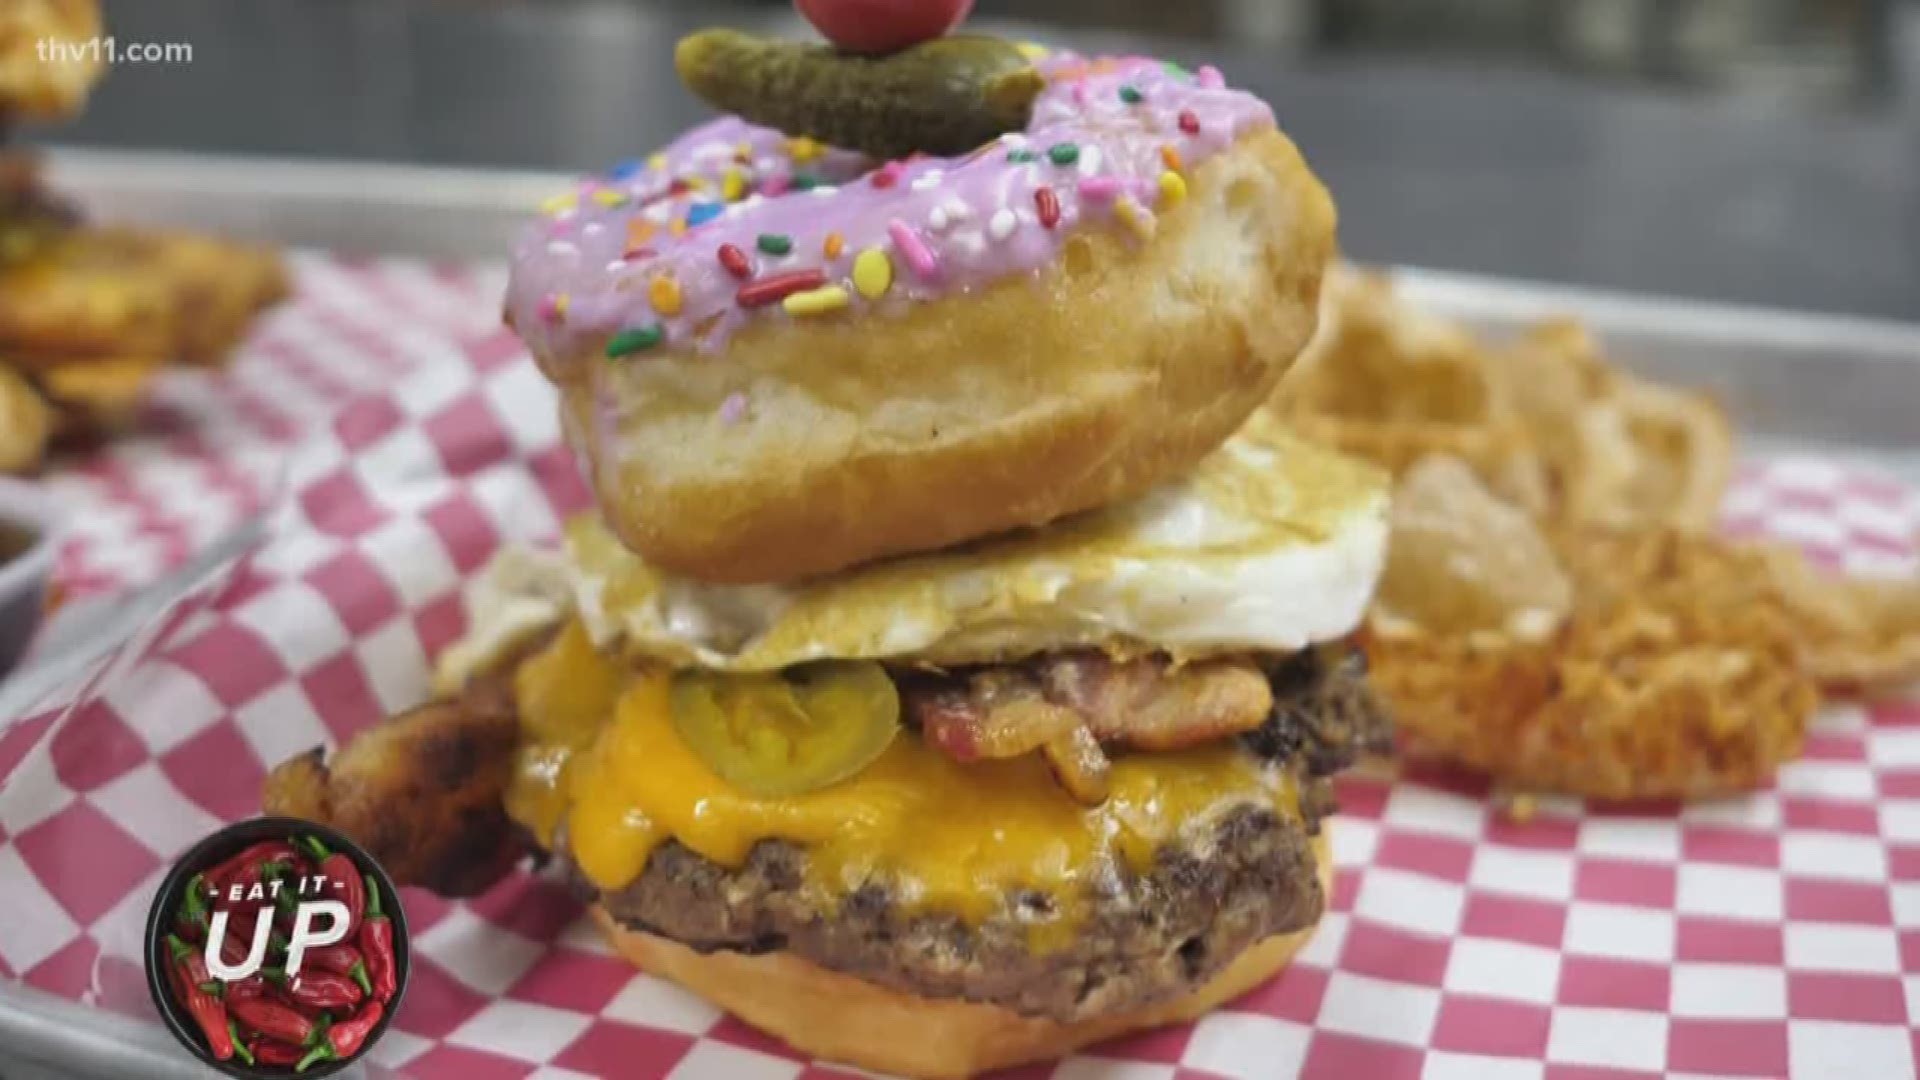 From donut burgers to waffle chicken sandwiches and more, there’s a reason the lines are out the door for this Park Hill restaurant and bar.